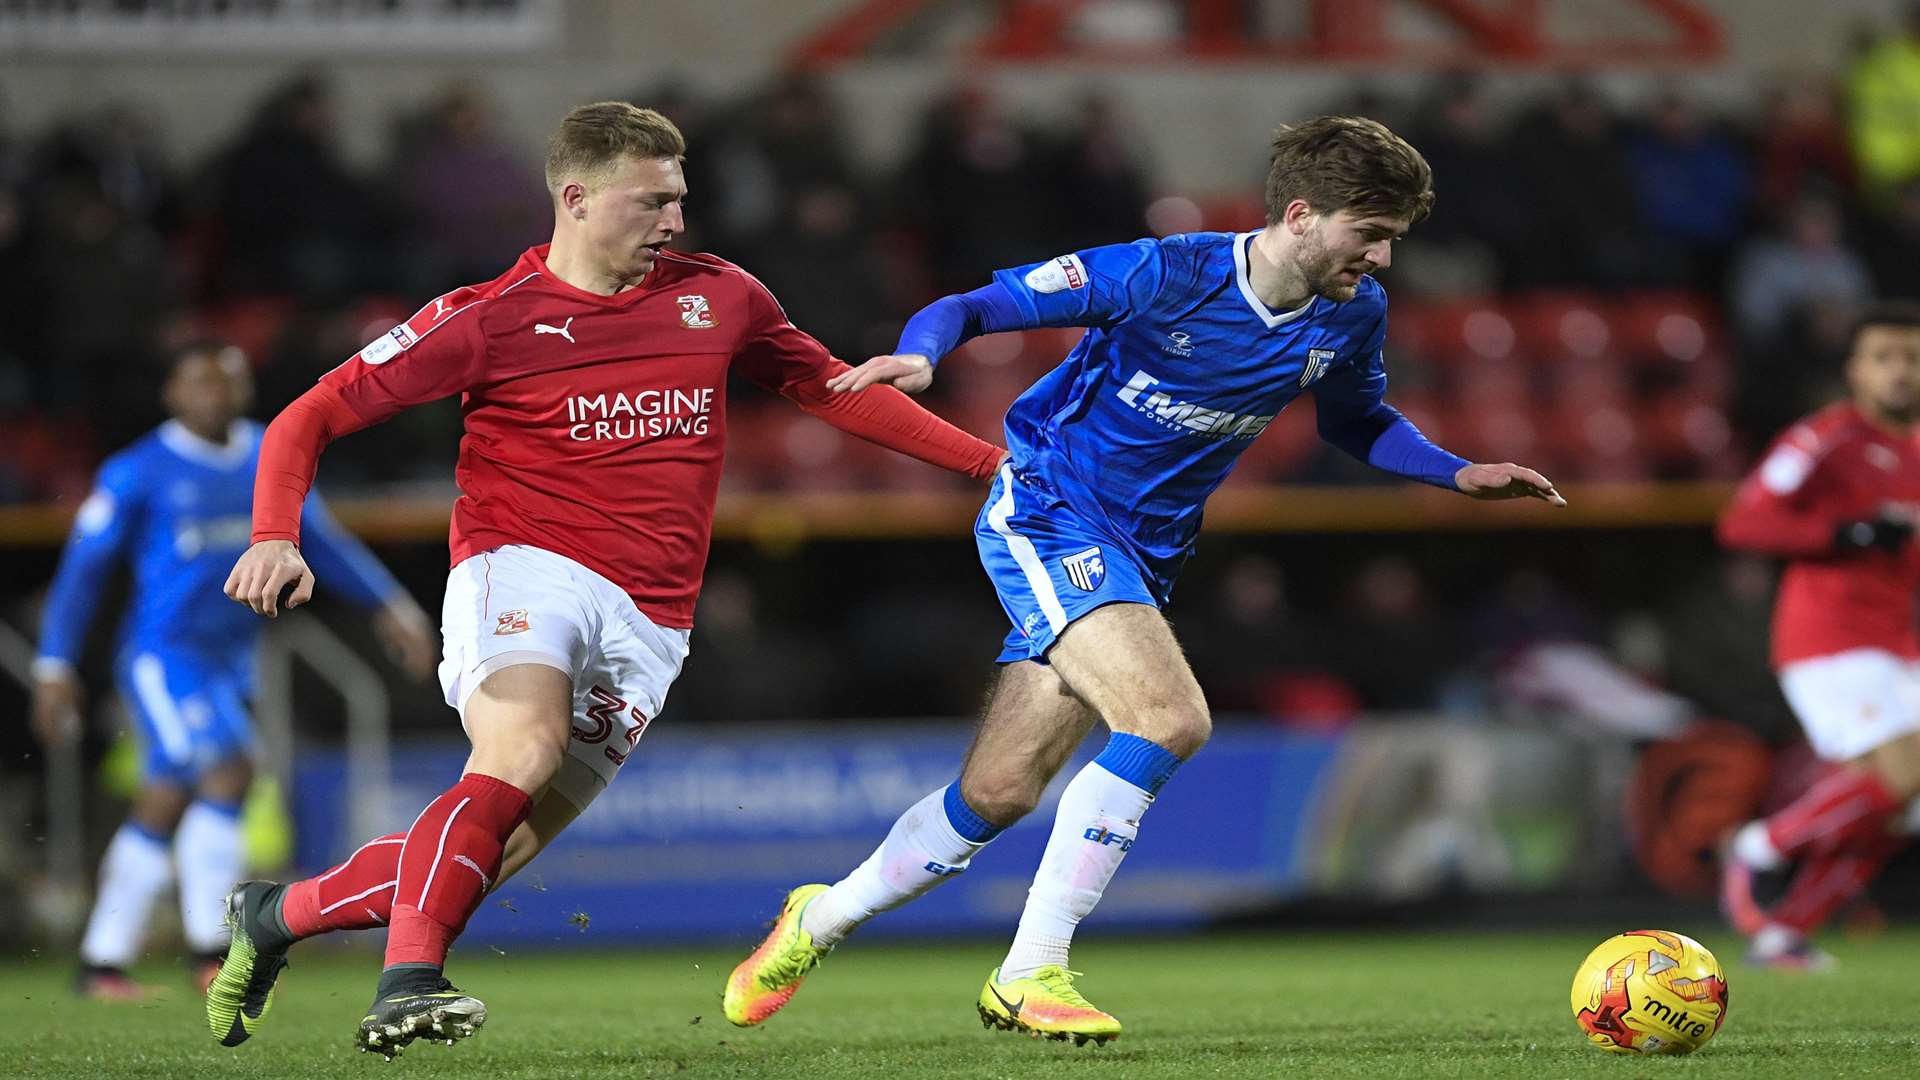 Ollie Muldoon in action for Gills against Swindon Picture: Ady Kerry